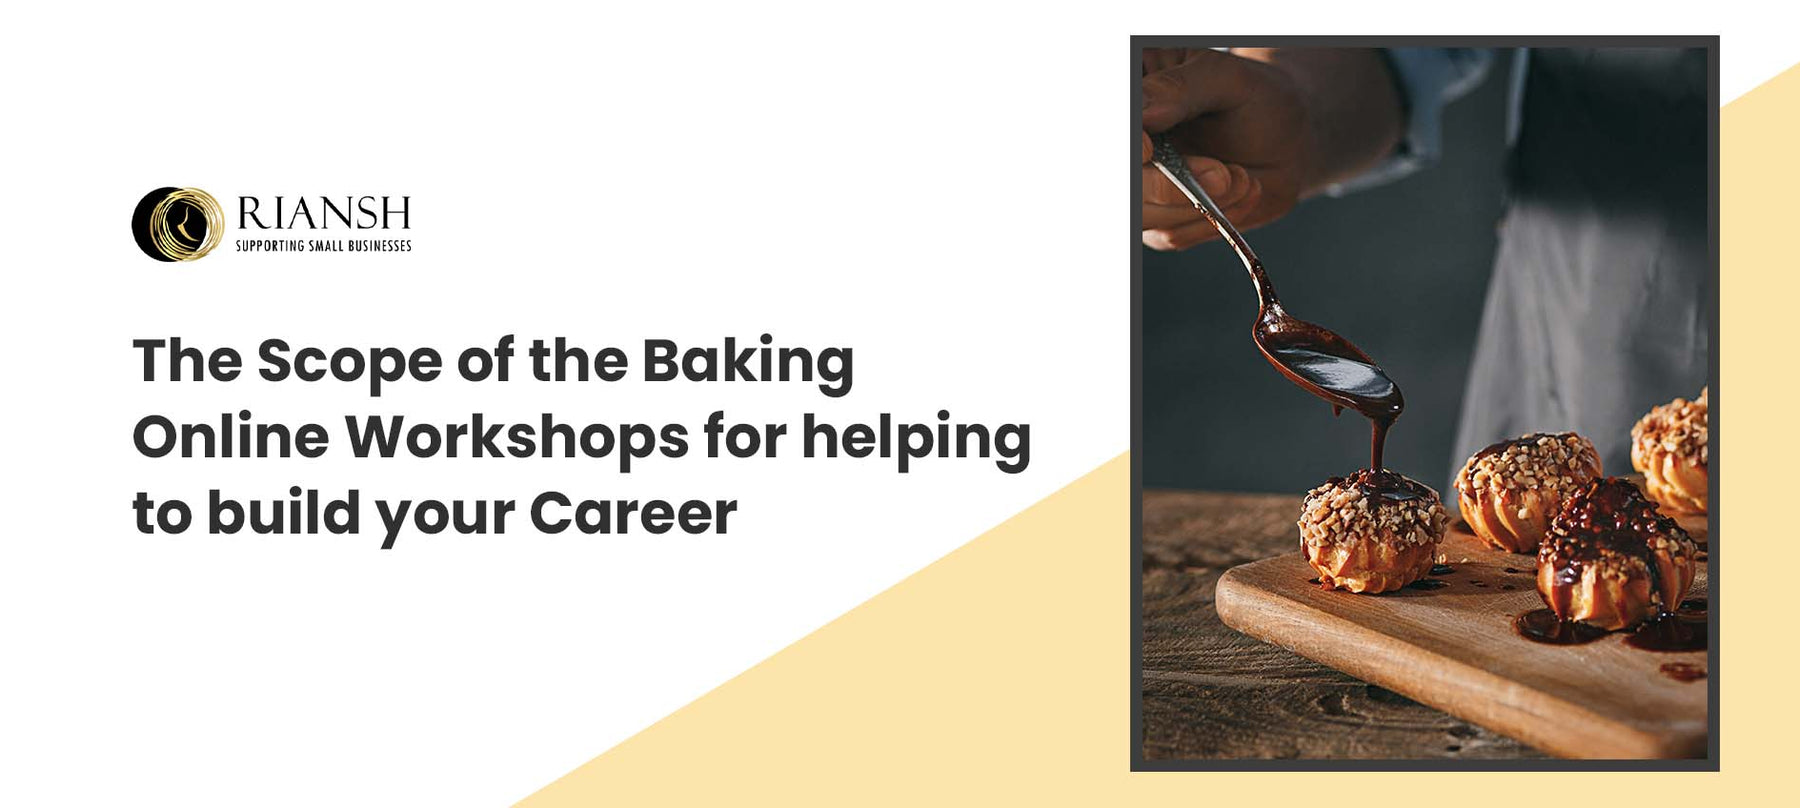 The Scope of the Baking Online Workshops for helping to build your Career